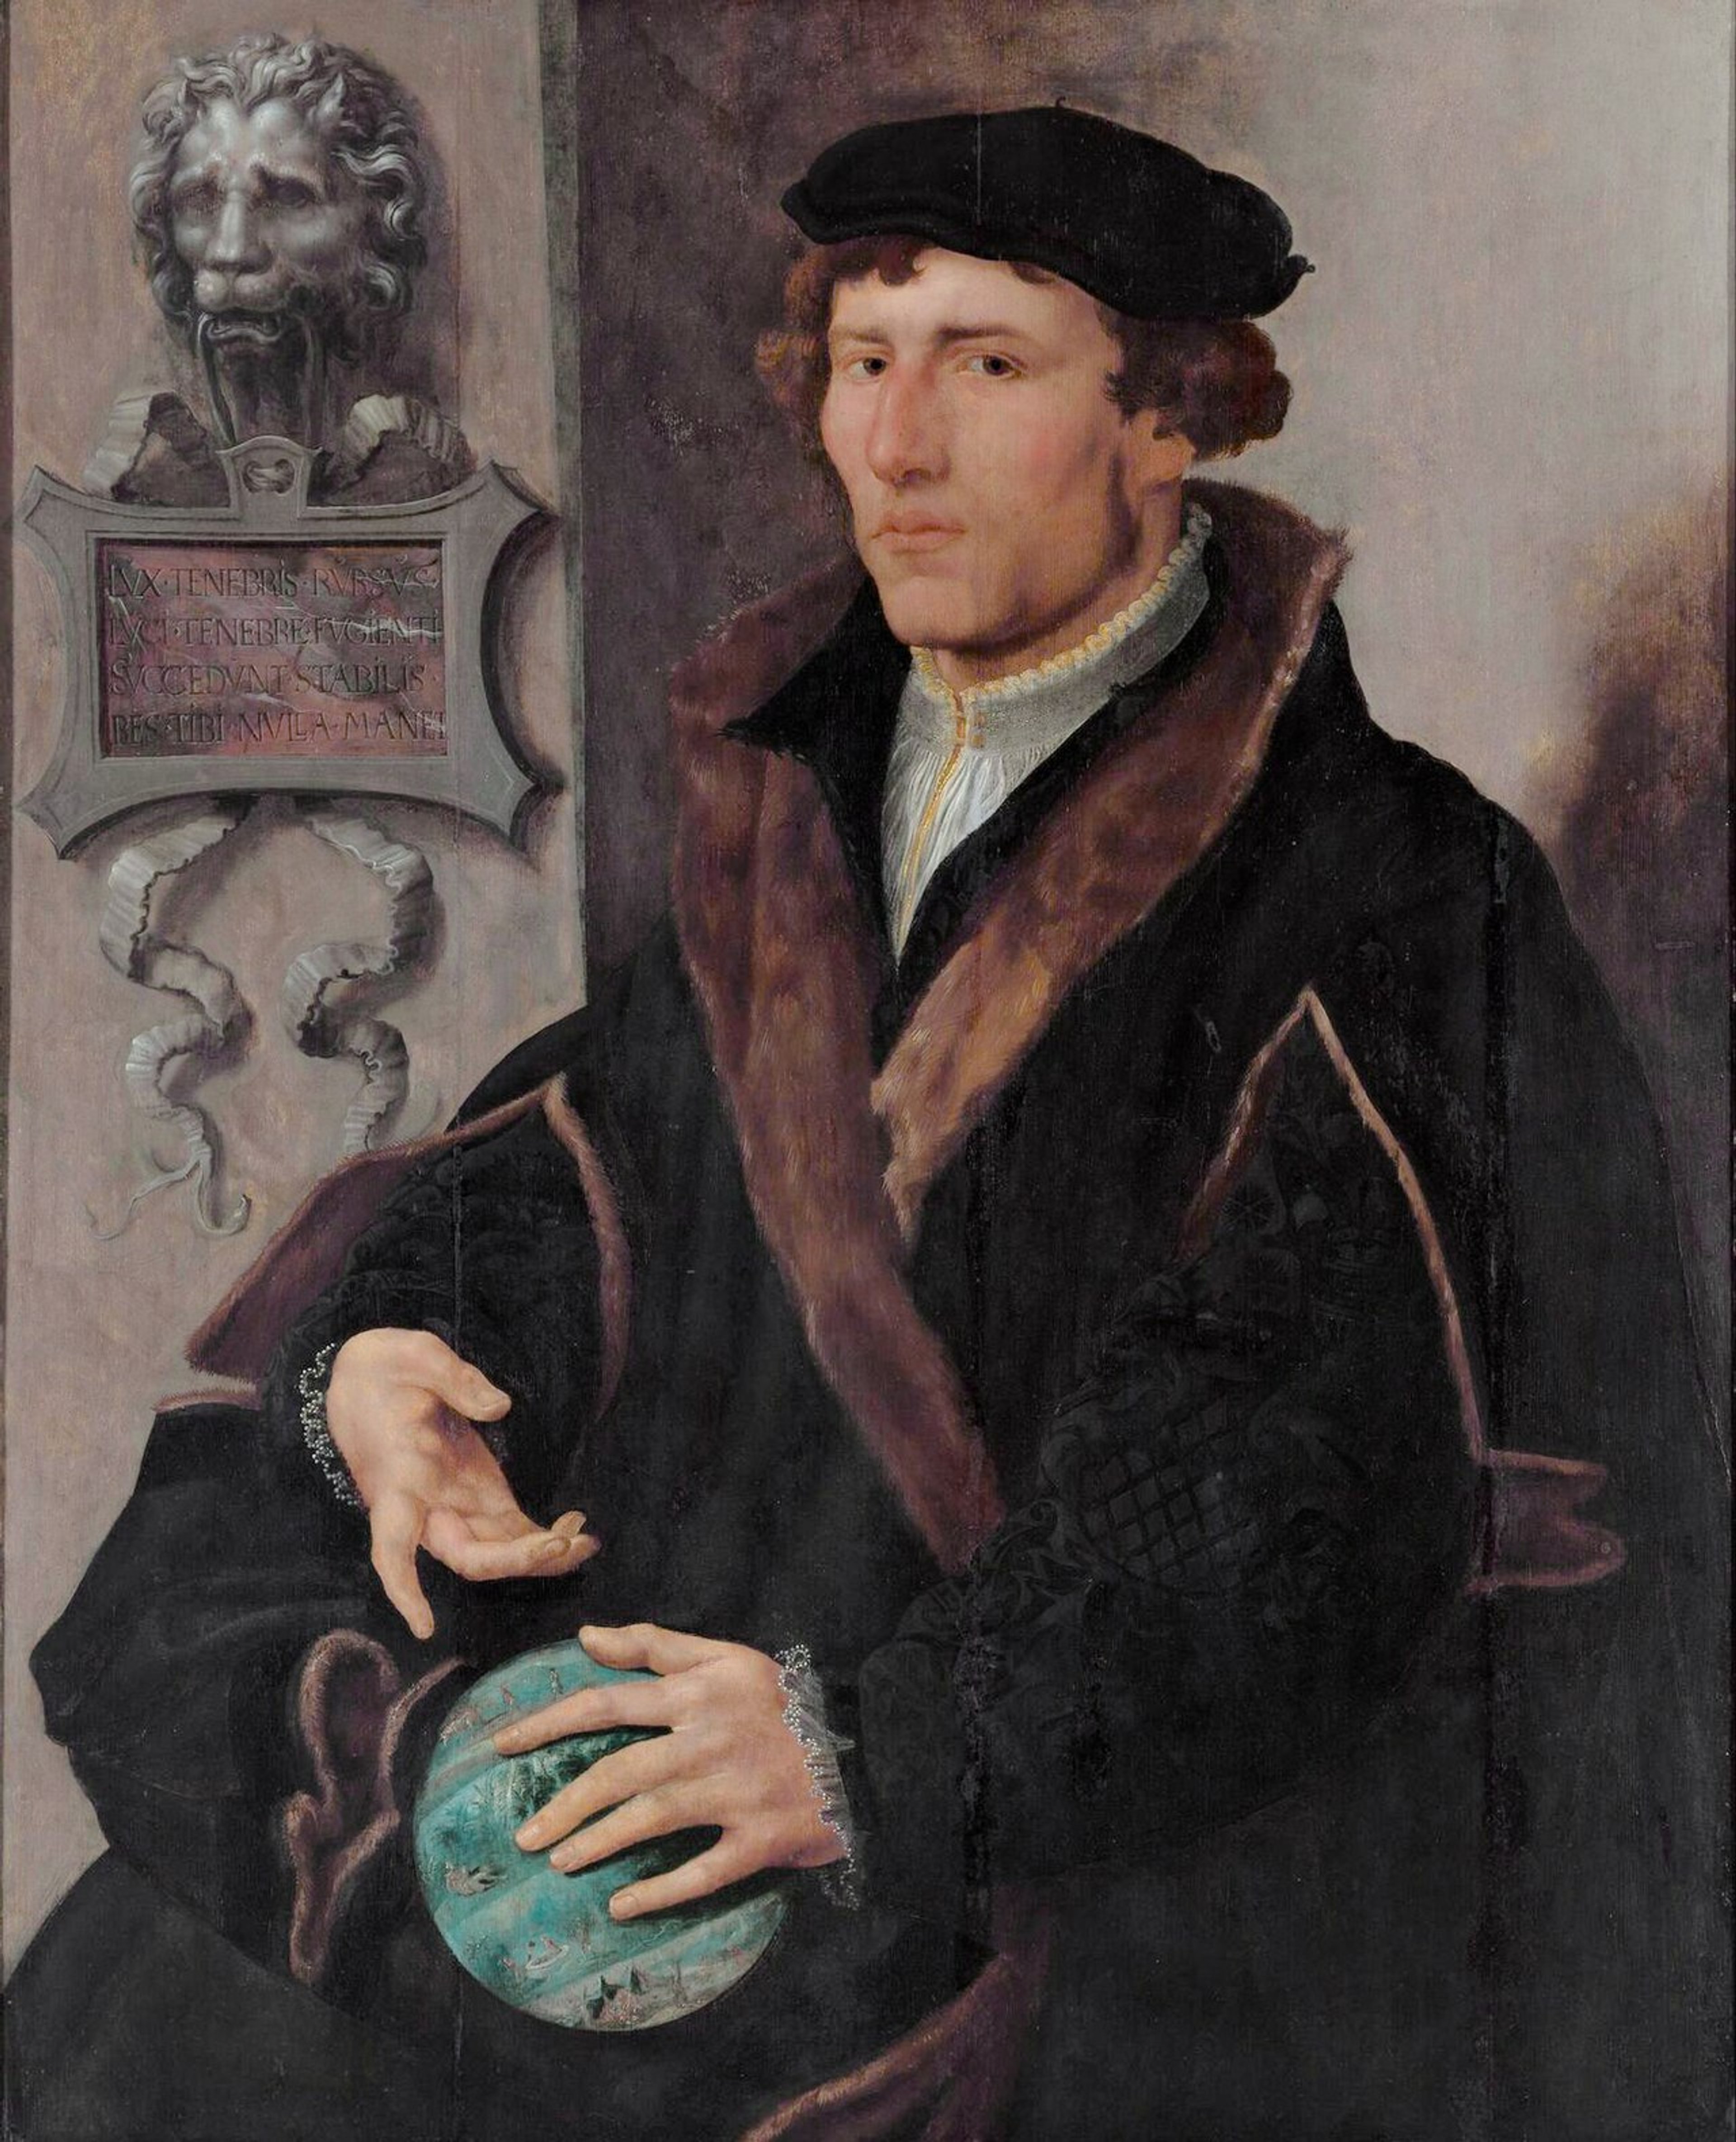 Colourful upper body painted portrait of Reinerus Gemma Frisius. A man with short brown hair wearing a dark coat and a hat. In his hands, he has a small globe. 